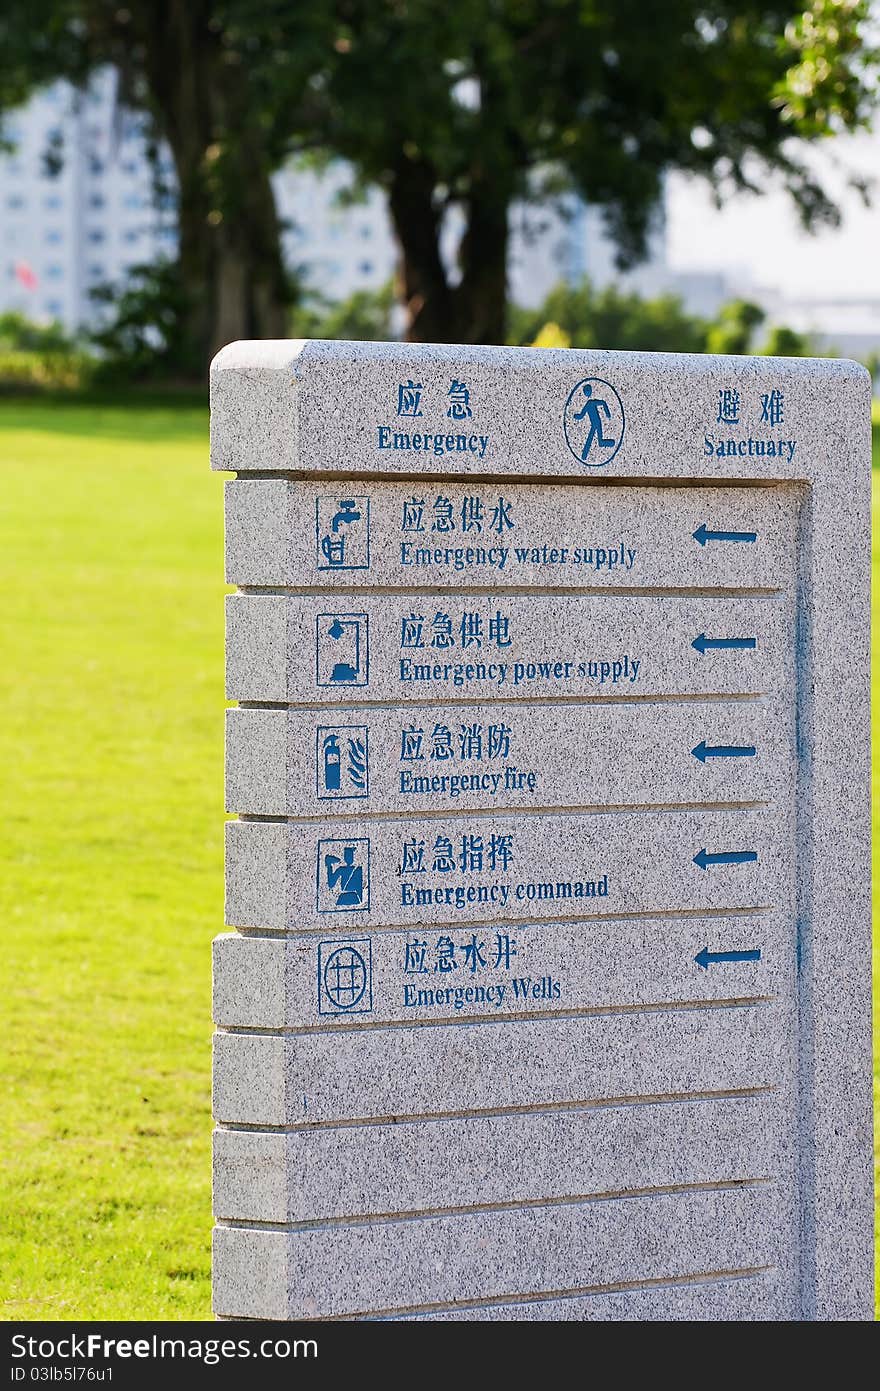 The Emergency signs in the park